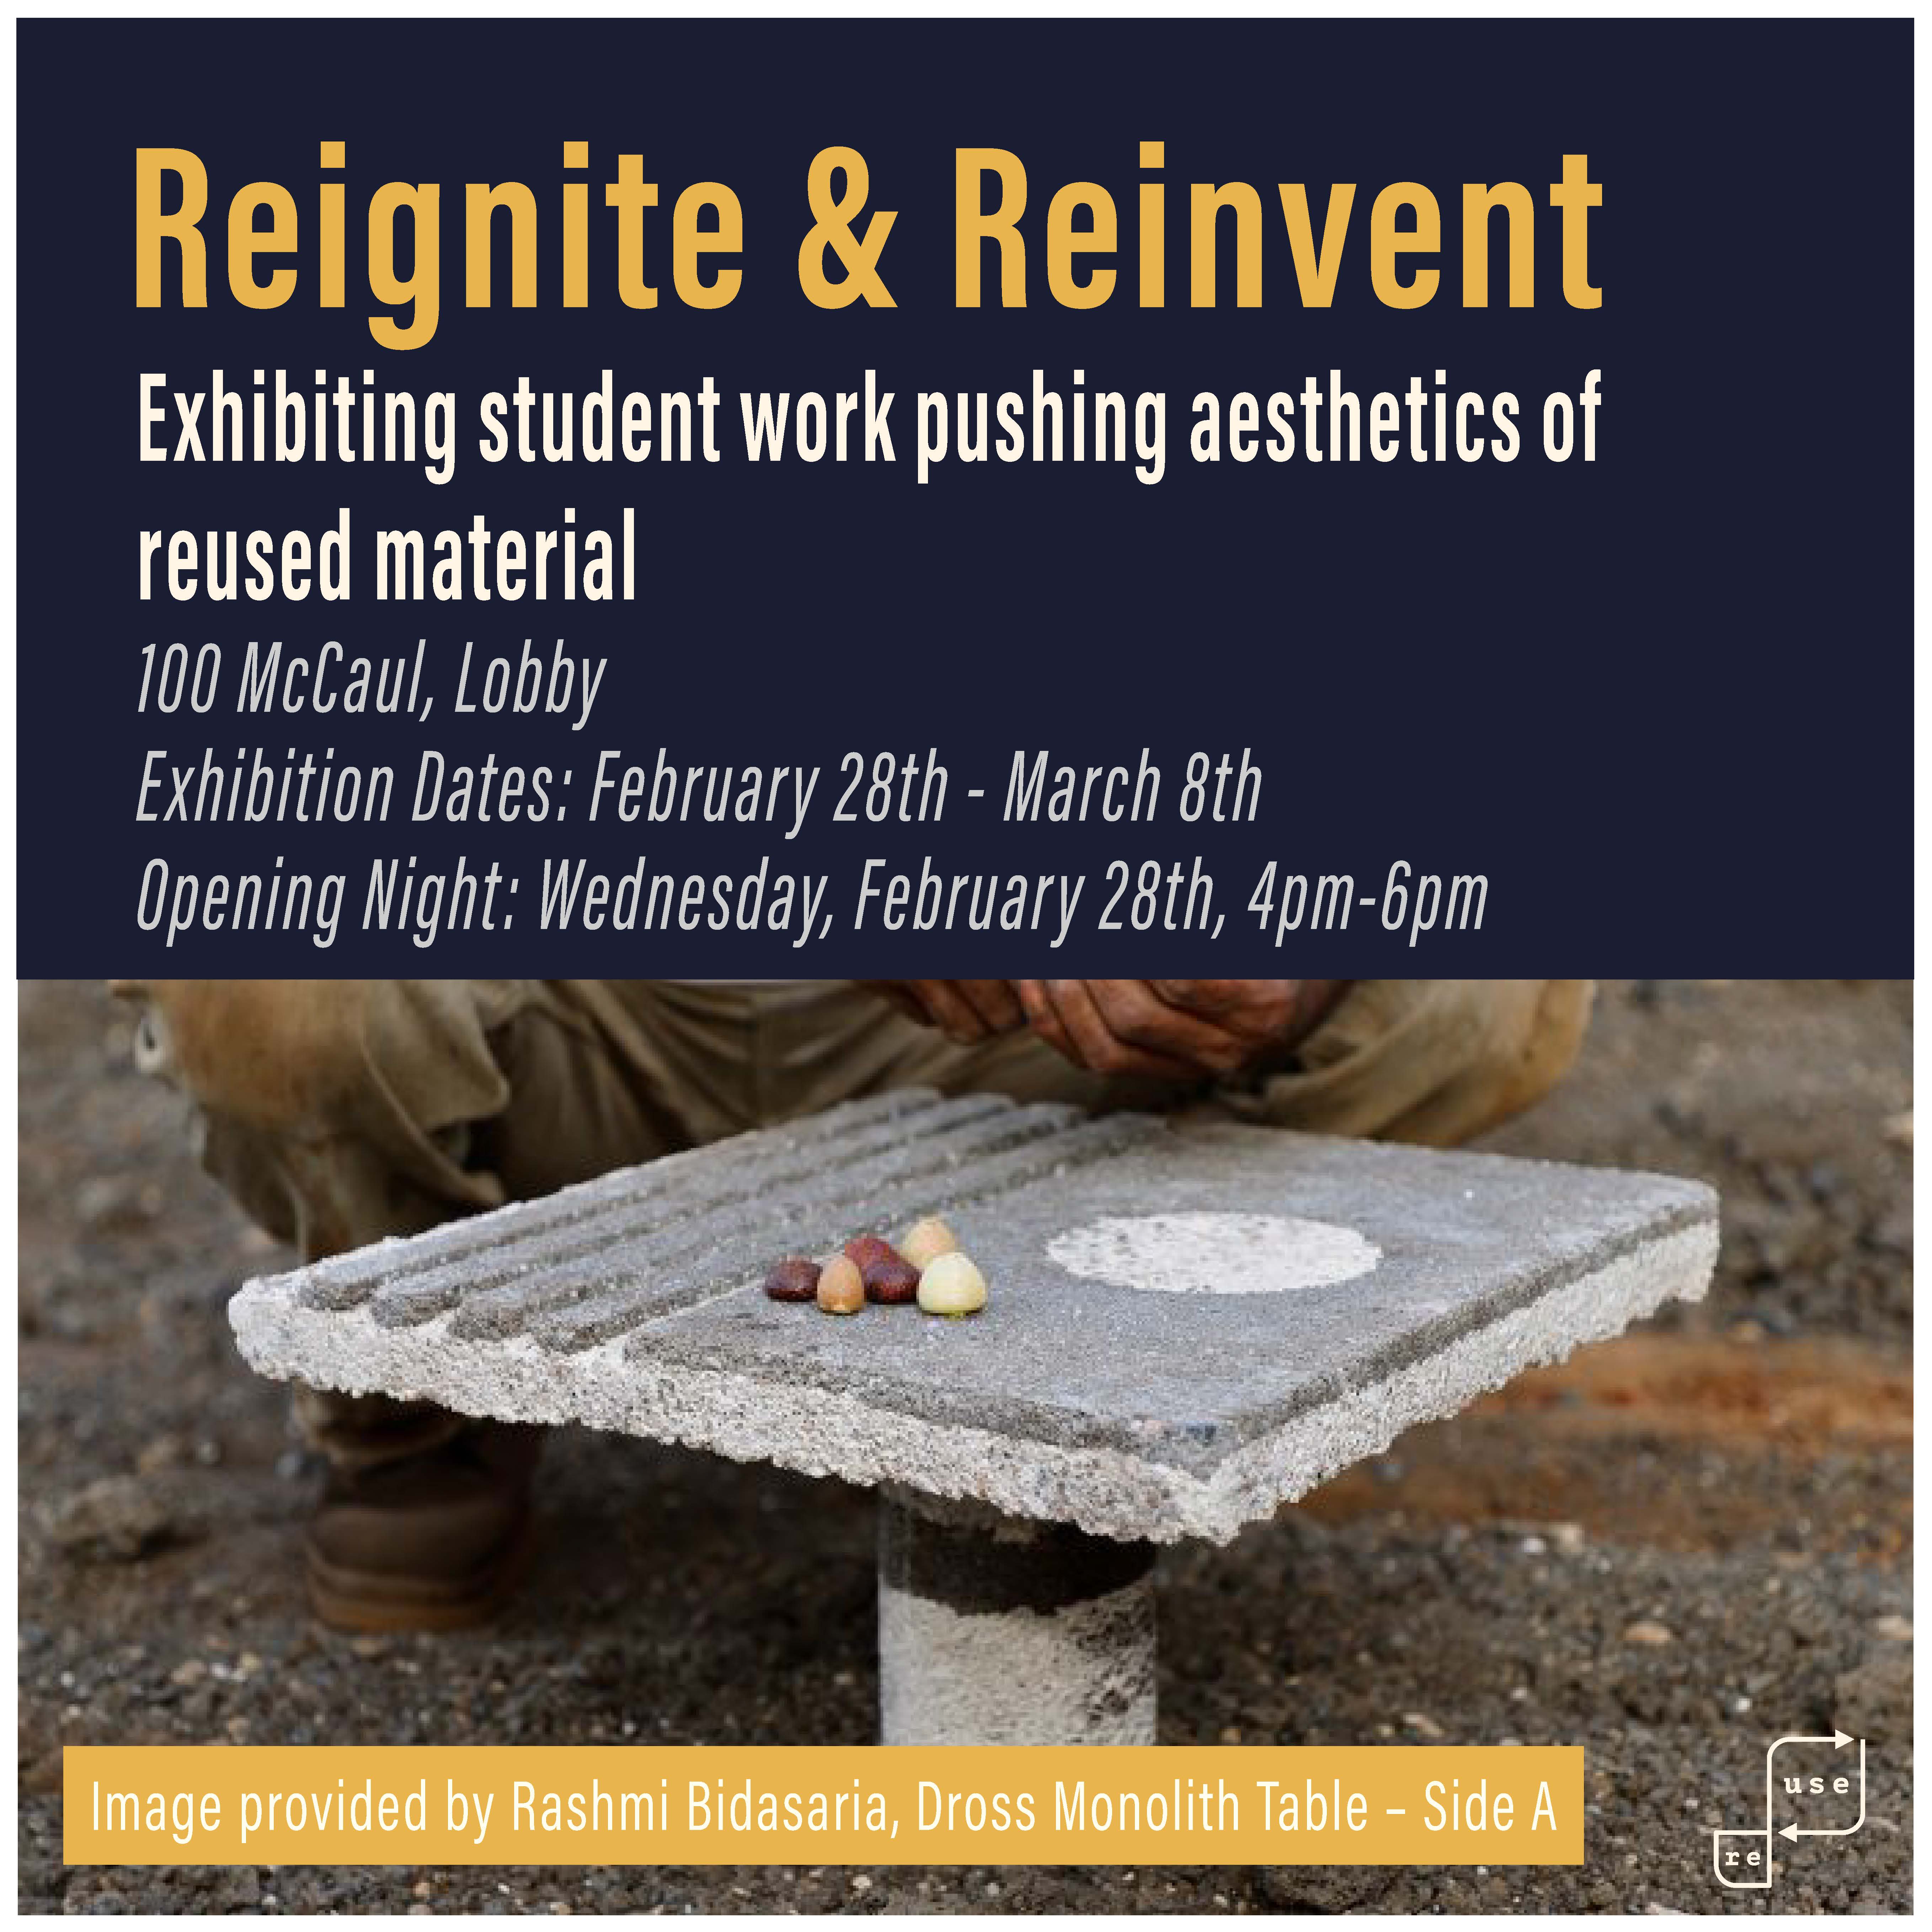 Reignite & Reinvent promotional poster featuring image by Rashmi Bidasaria of Dross Monolith Table